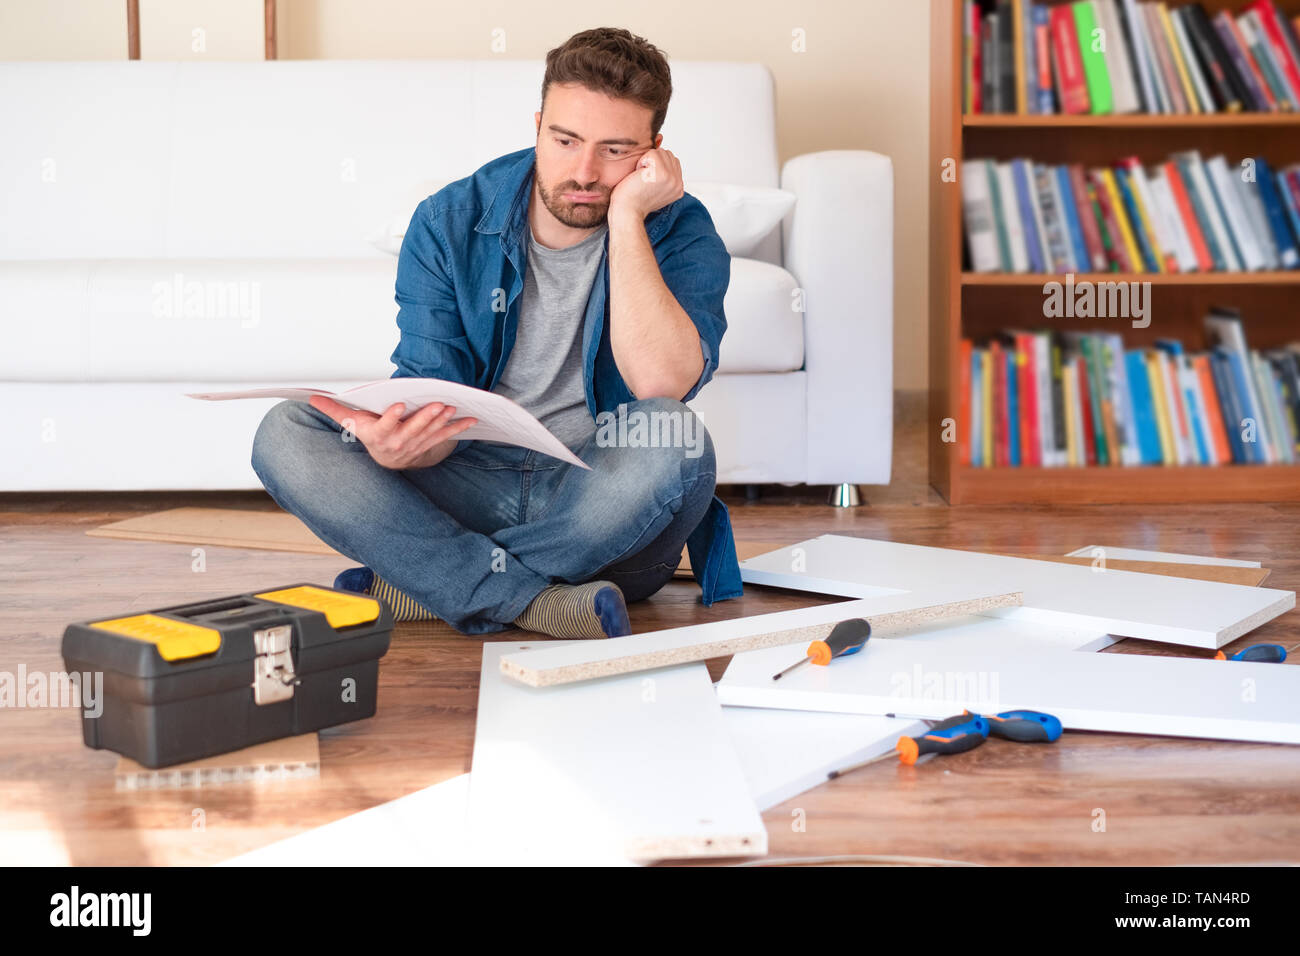 Man Portrait And Do It Yourself Furniture Assembly Stock Photo Alamy